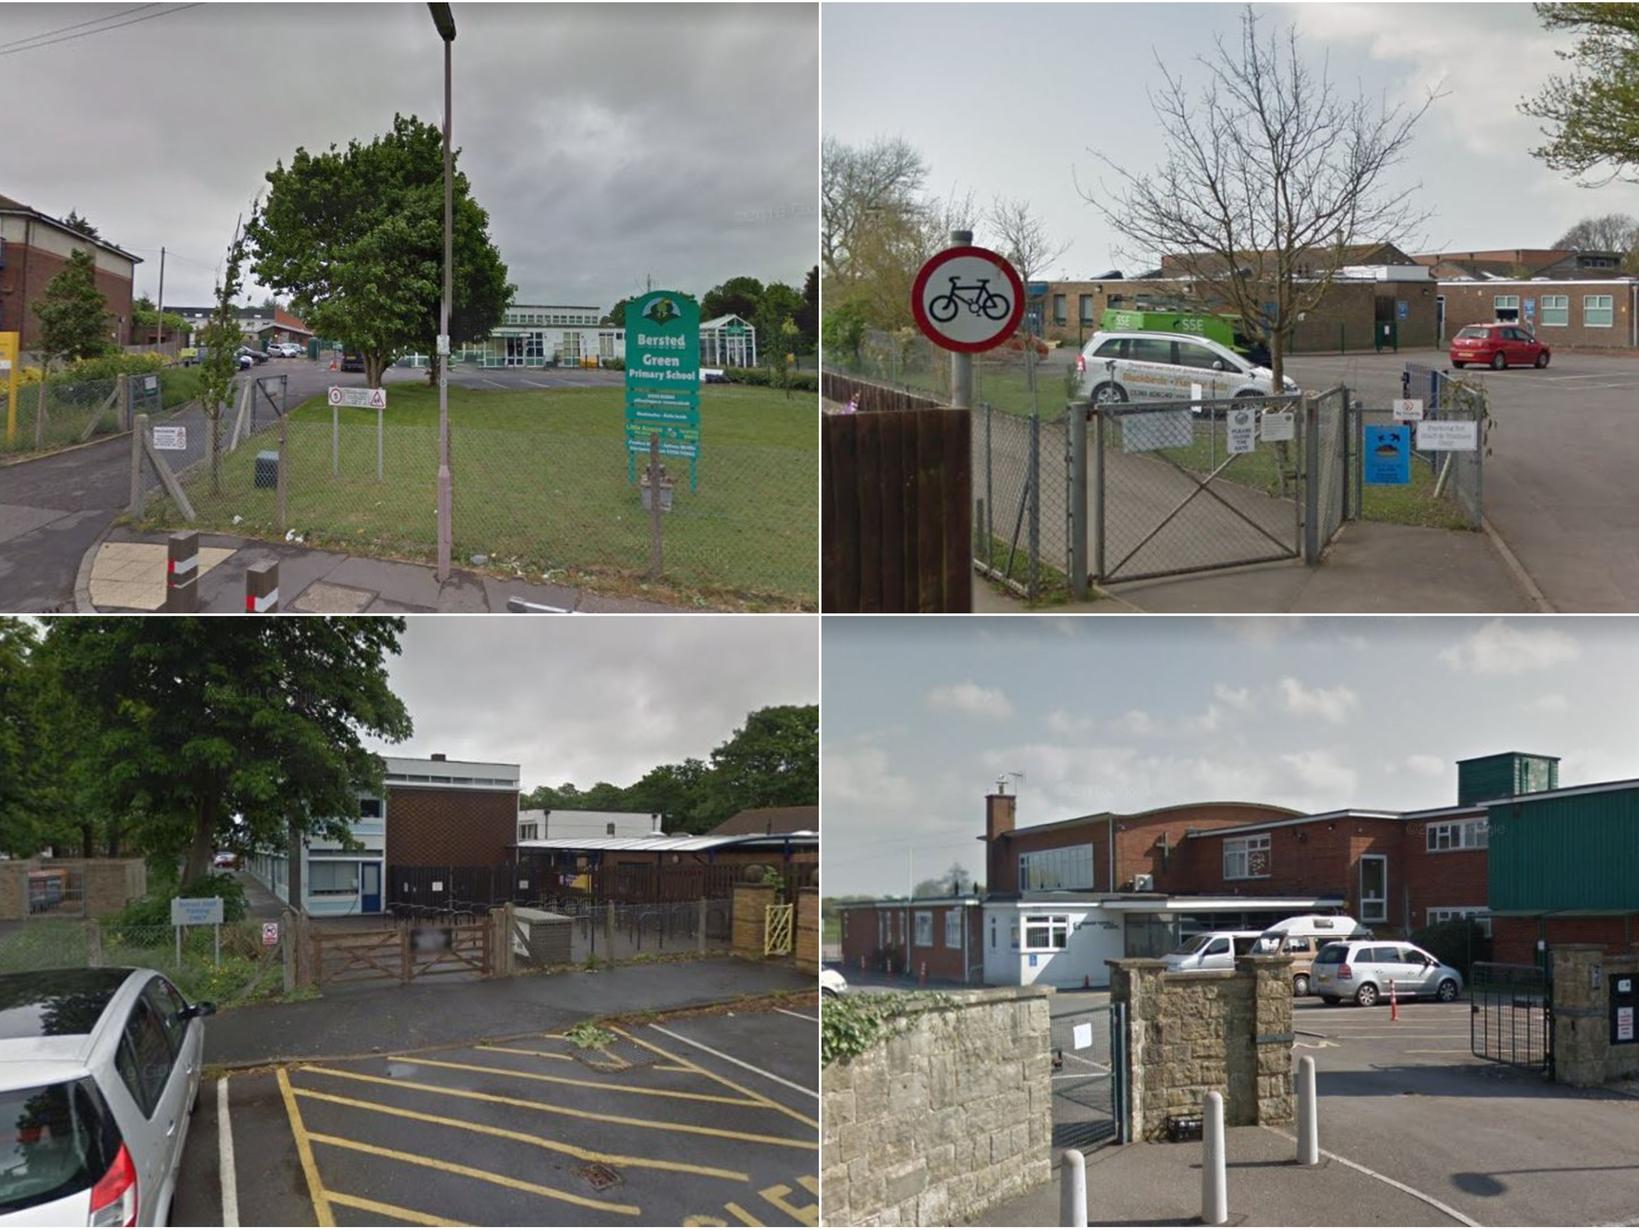 These are the Ofsted ratings for schools in Bognor Regis.